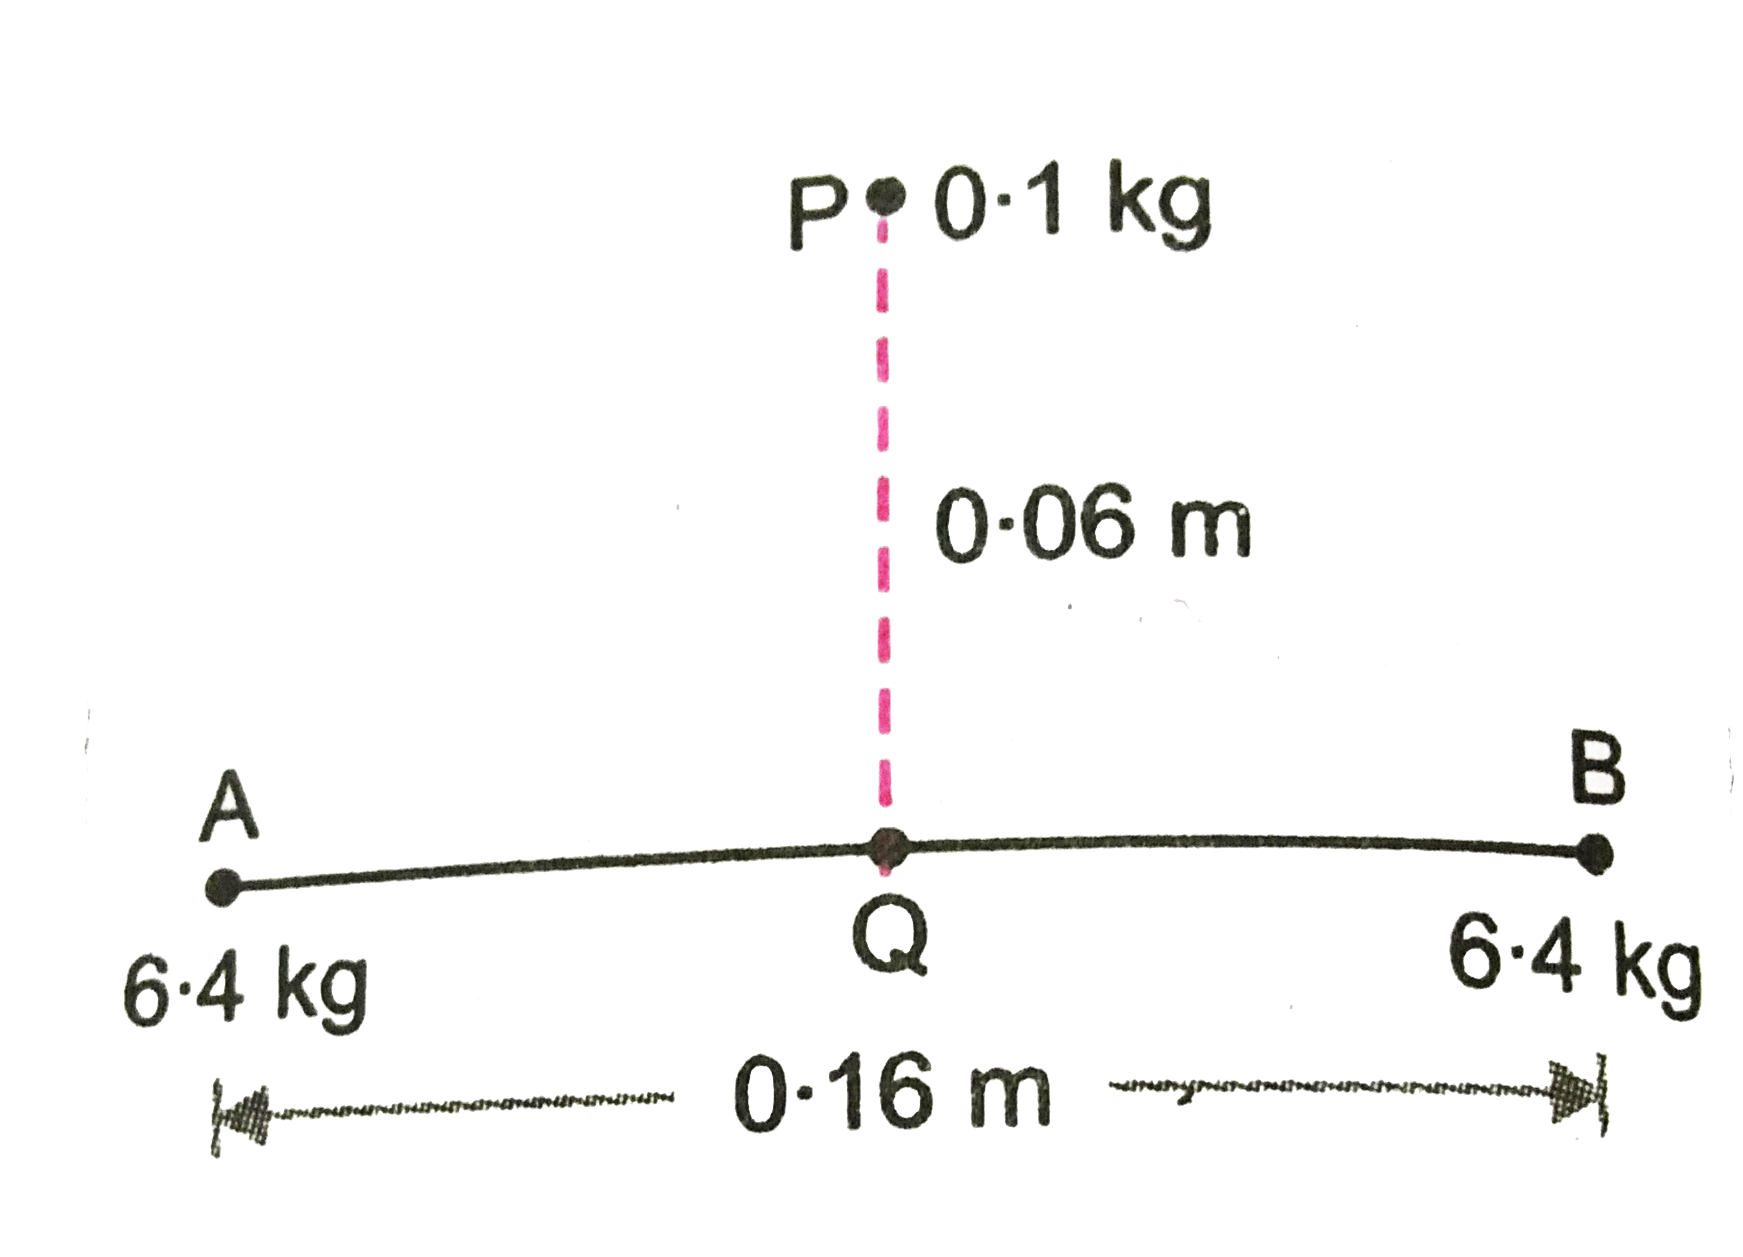 Two equal masses of 6.40 kg are separted by a distance of 0.16 m. A small body is released from a point P, equidistant from the two masses and at a distance of 0.06 m from the line joining them. Fig.   (a) Calculate the velocity of this body when it passes through Q.   (b) Calculate the acceleration of this body at P and Q if its mass is 0.1 kg.   Use G = 6.67 xx 10^(-11) N m^(2) kg^(-2)